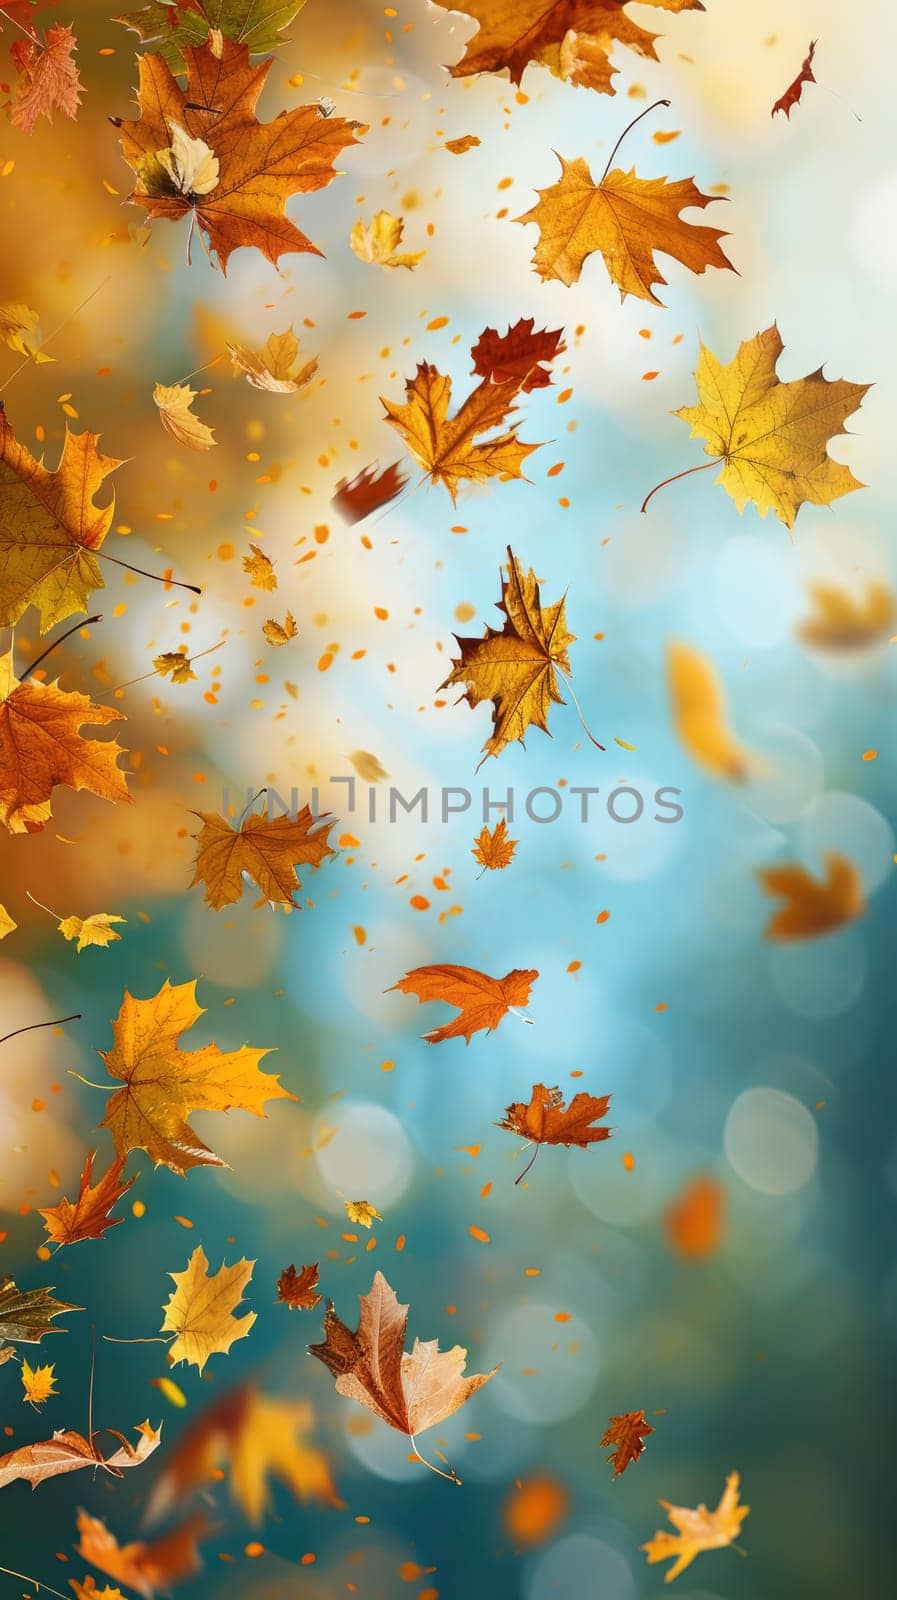 Raising maple leaves dancing in the wind, the autumn wind creates a picturesque symphony of autumn whirlwind and colors.